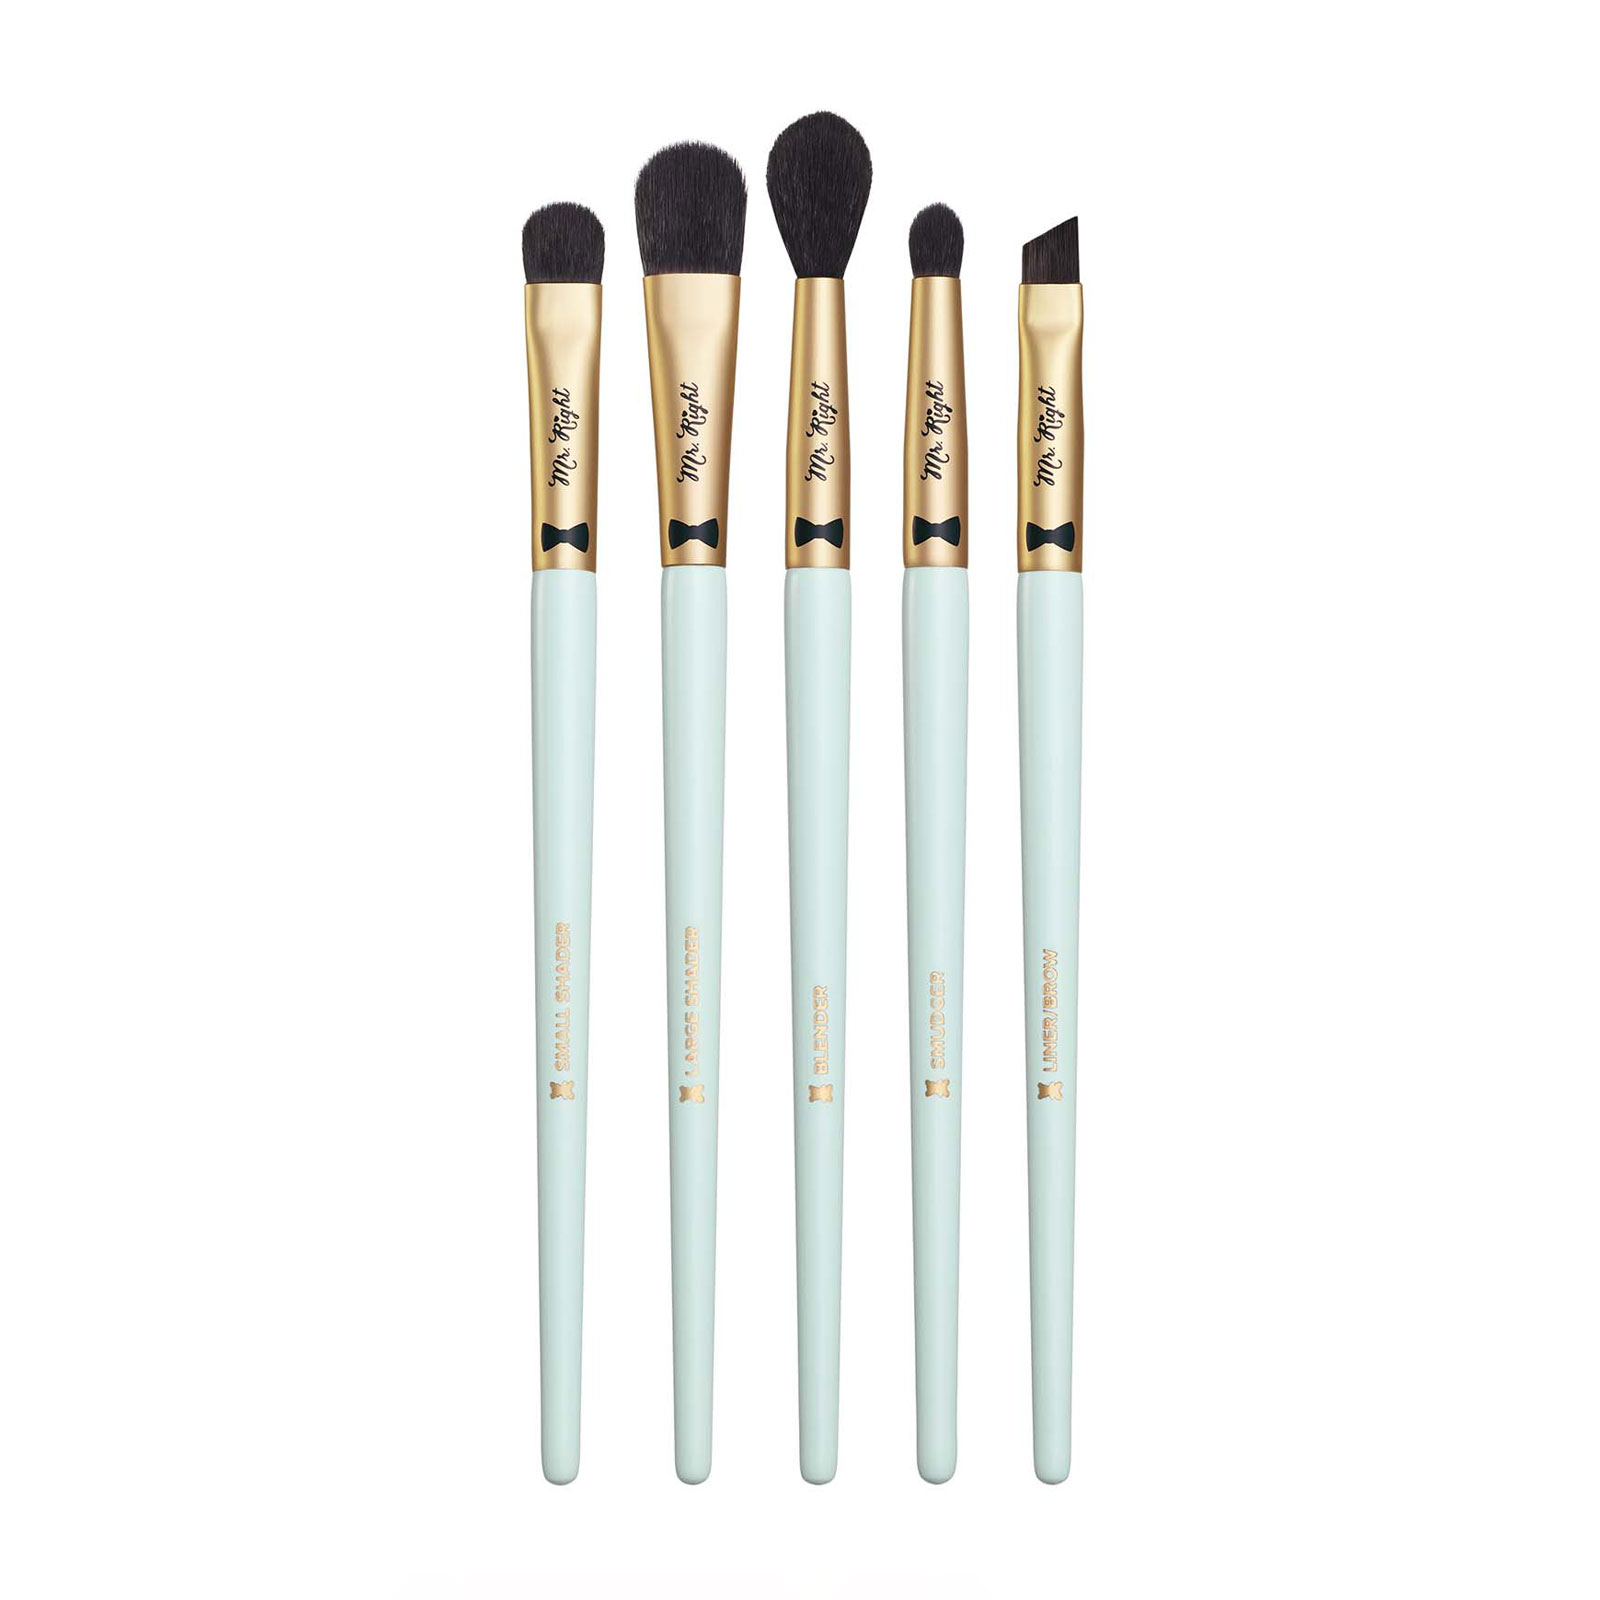 Too Faced Mr. Right Eye Essential 5 Piece Brush Set